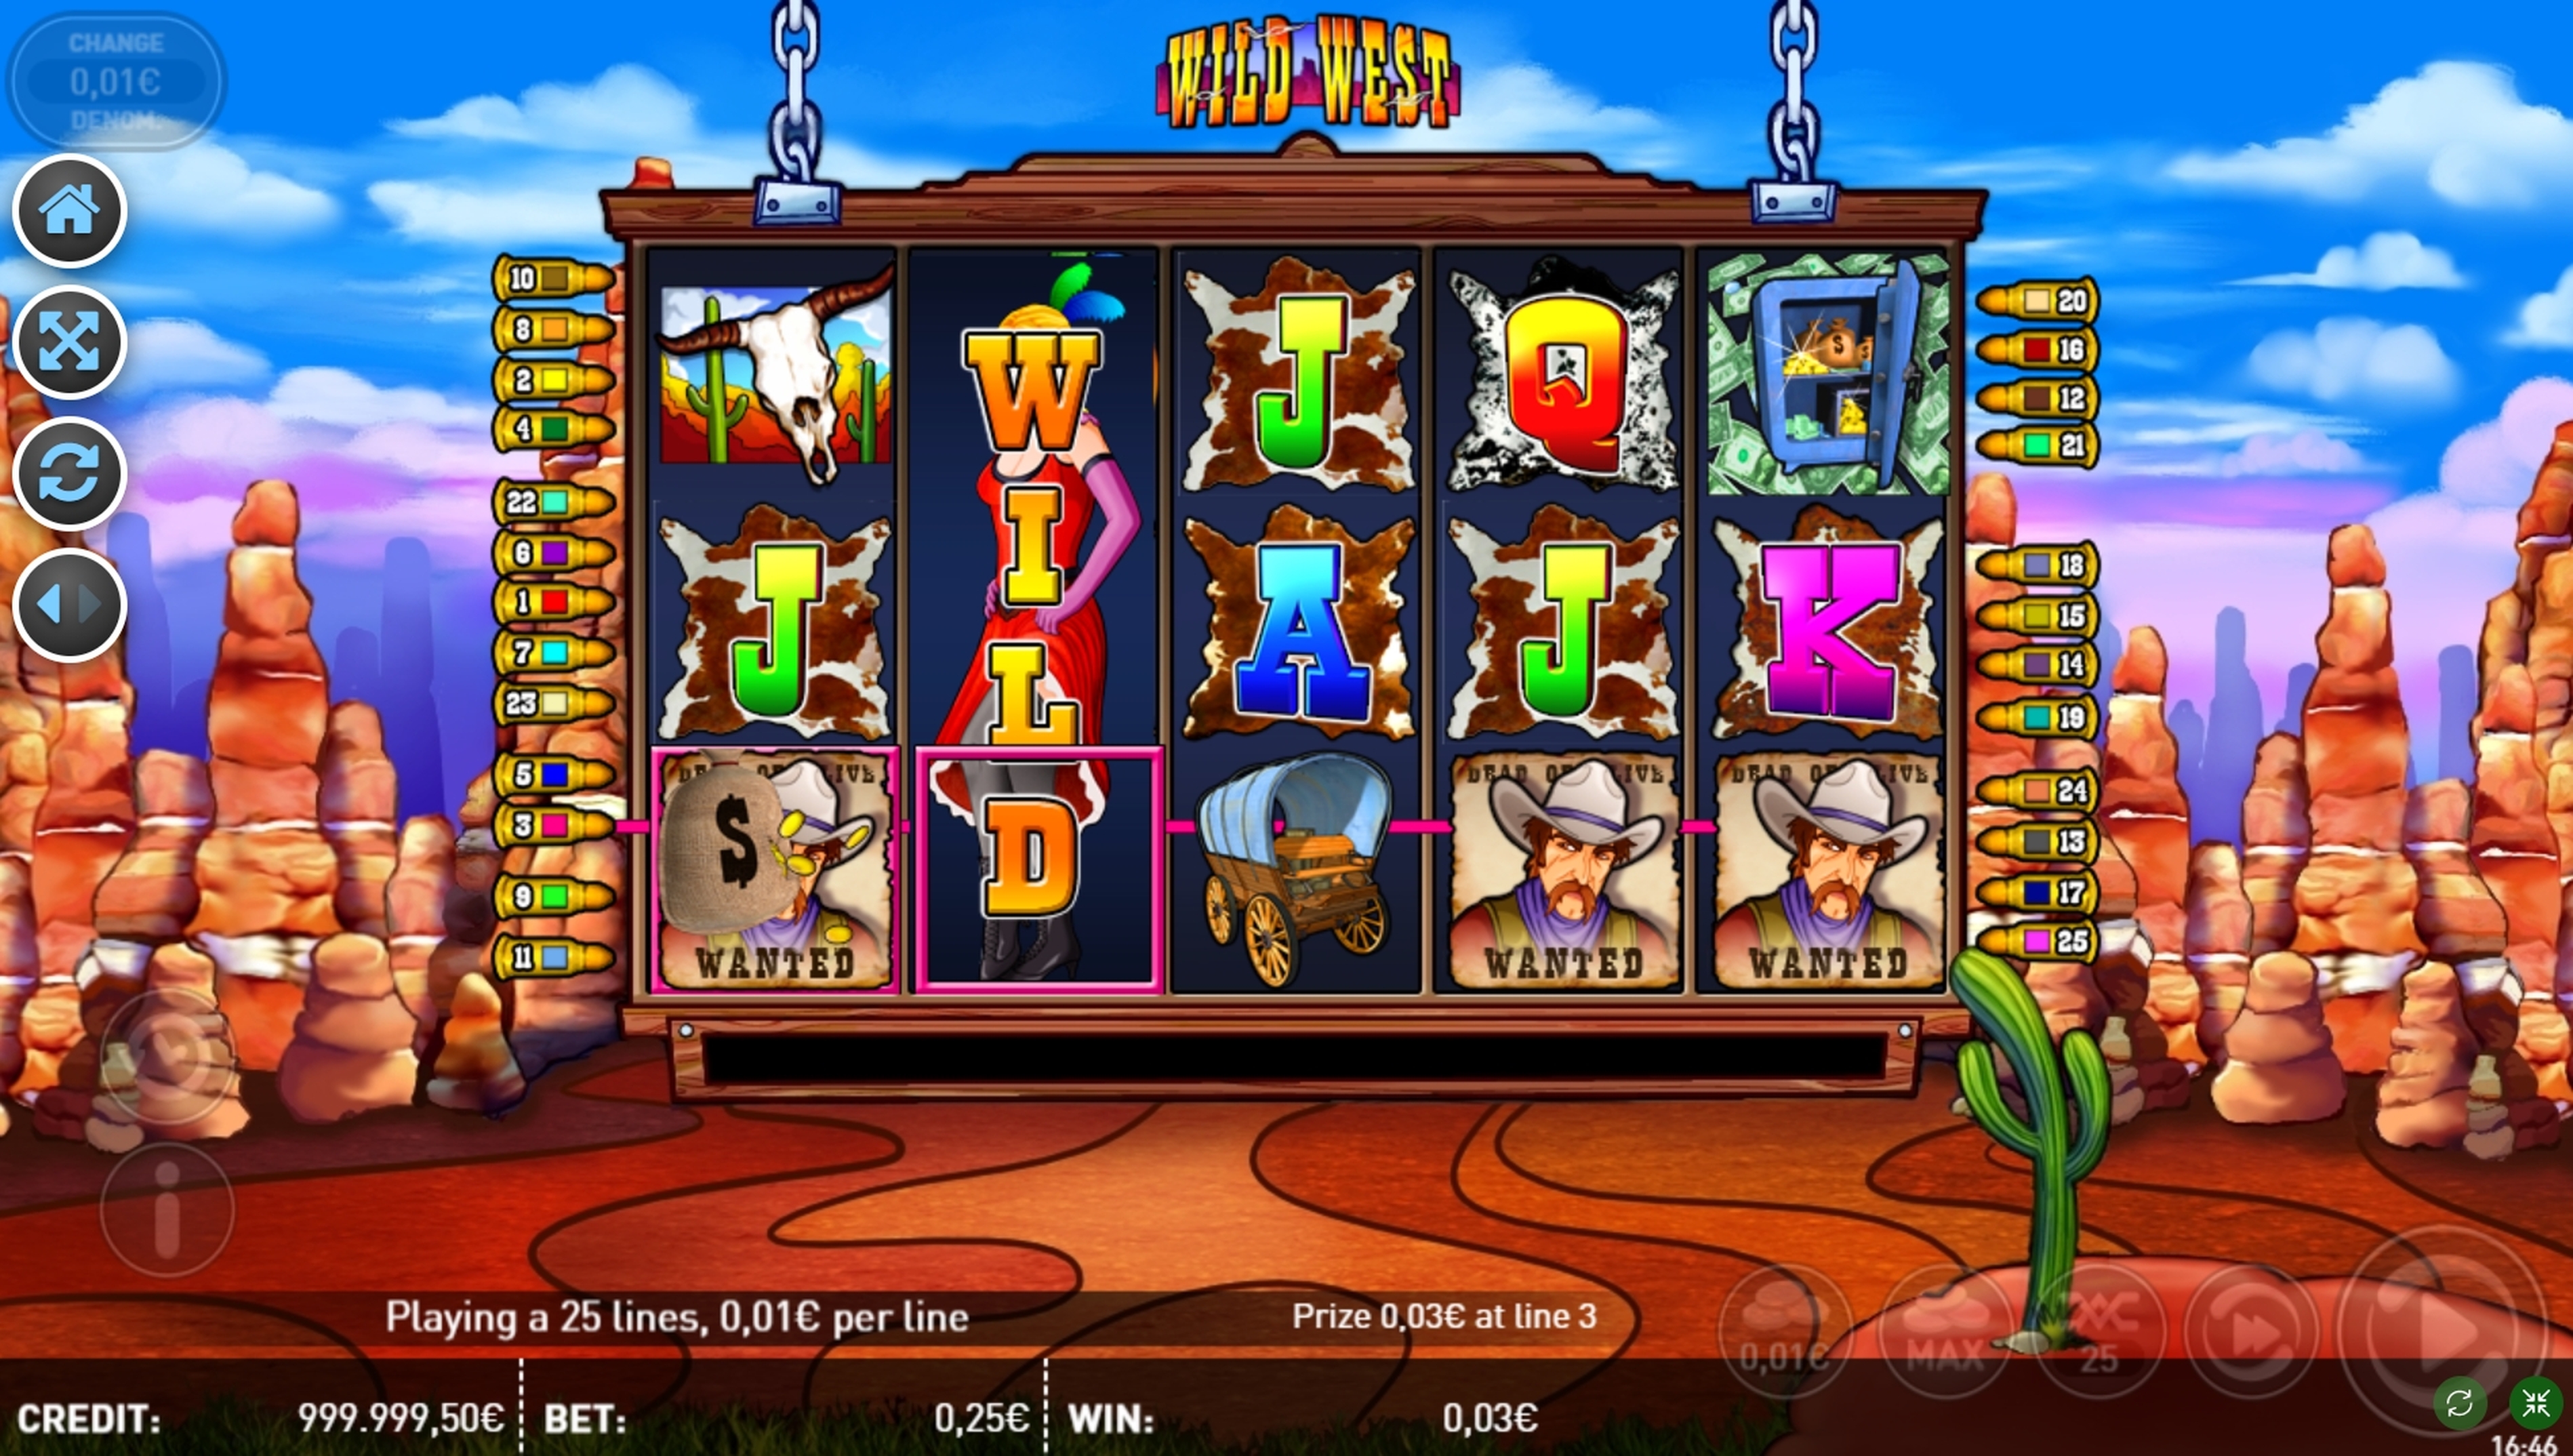 Win Money in Wild West Free Slot Game by R. Franco